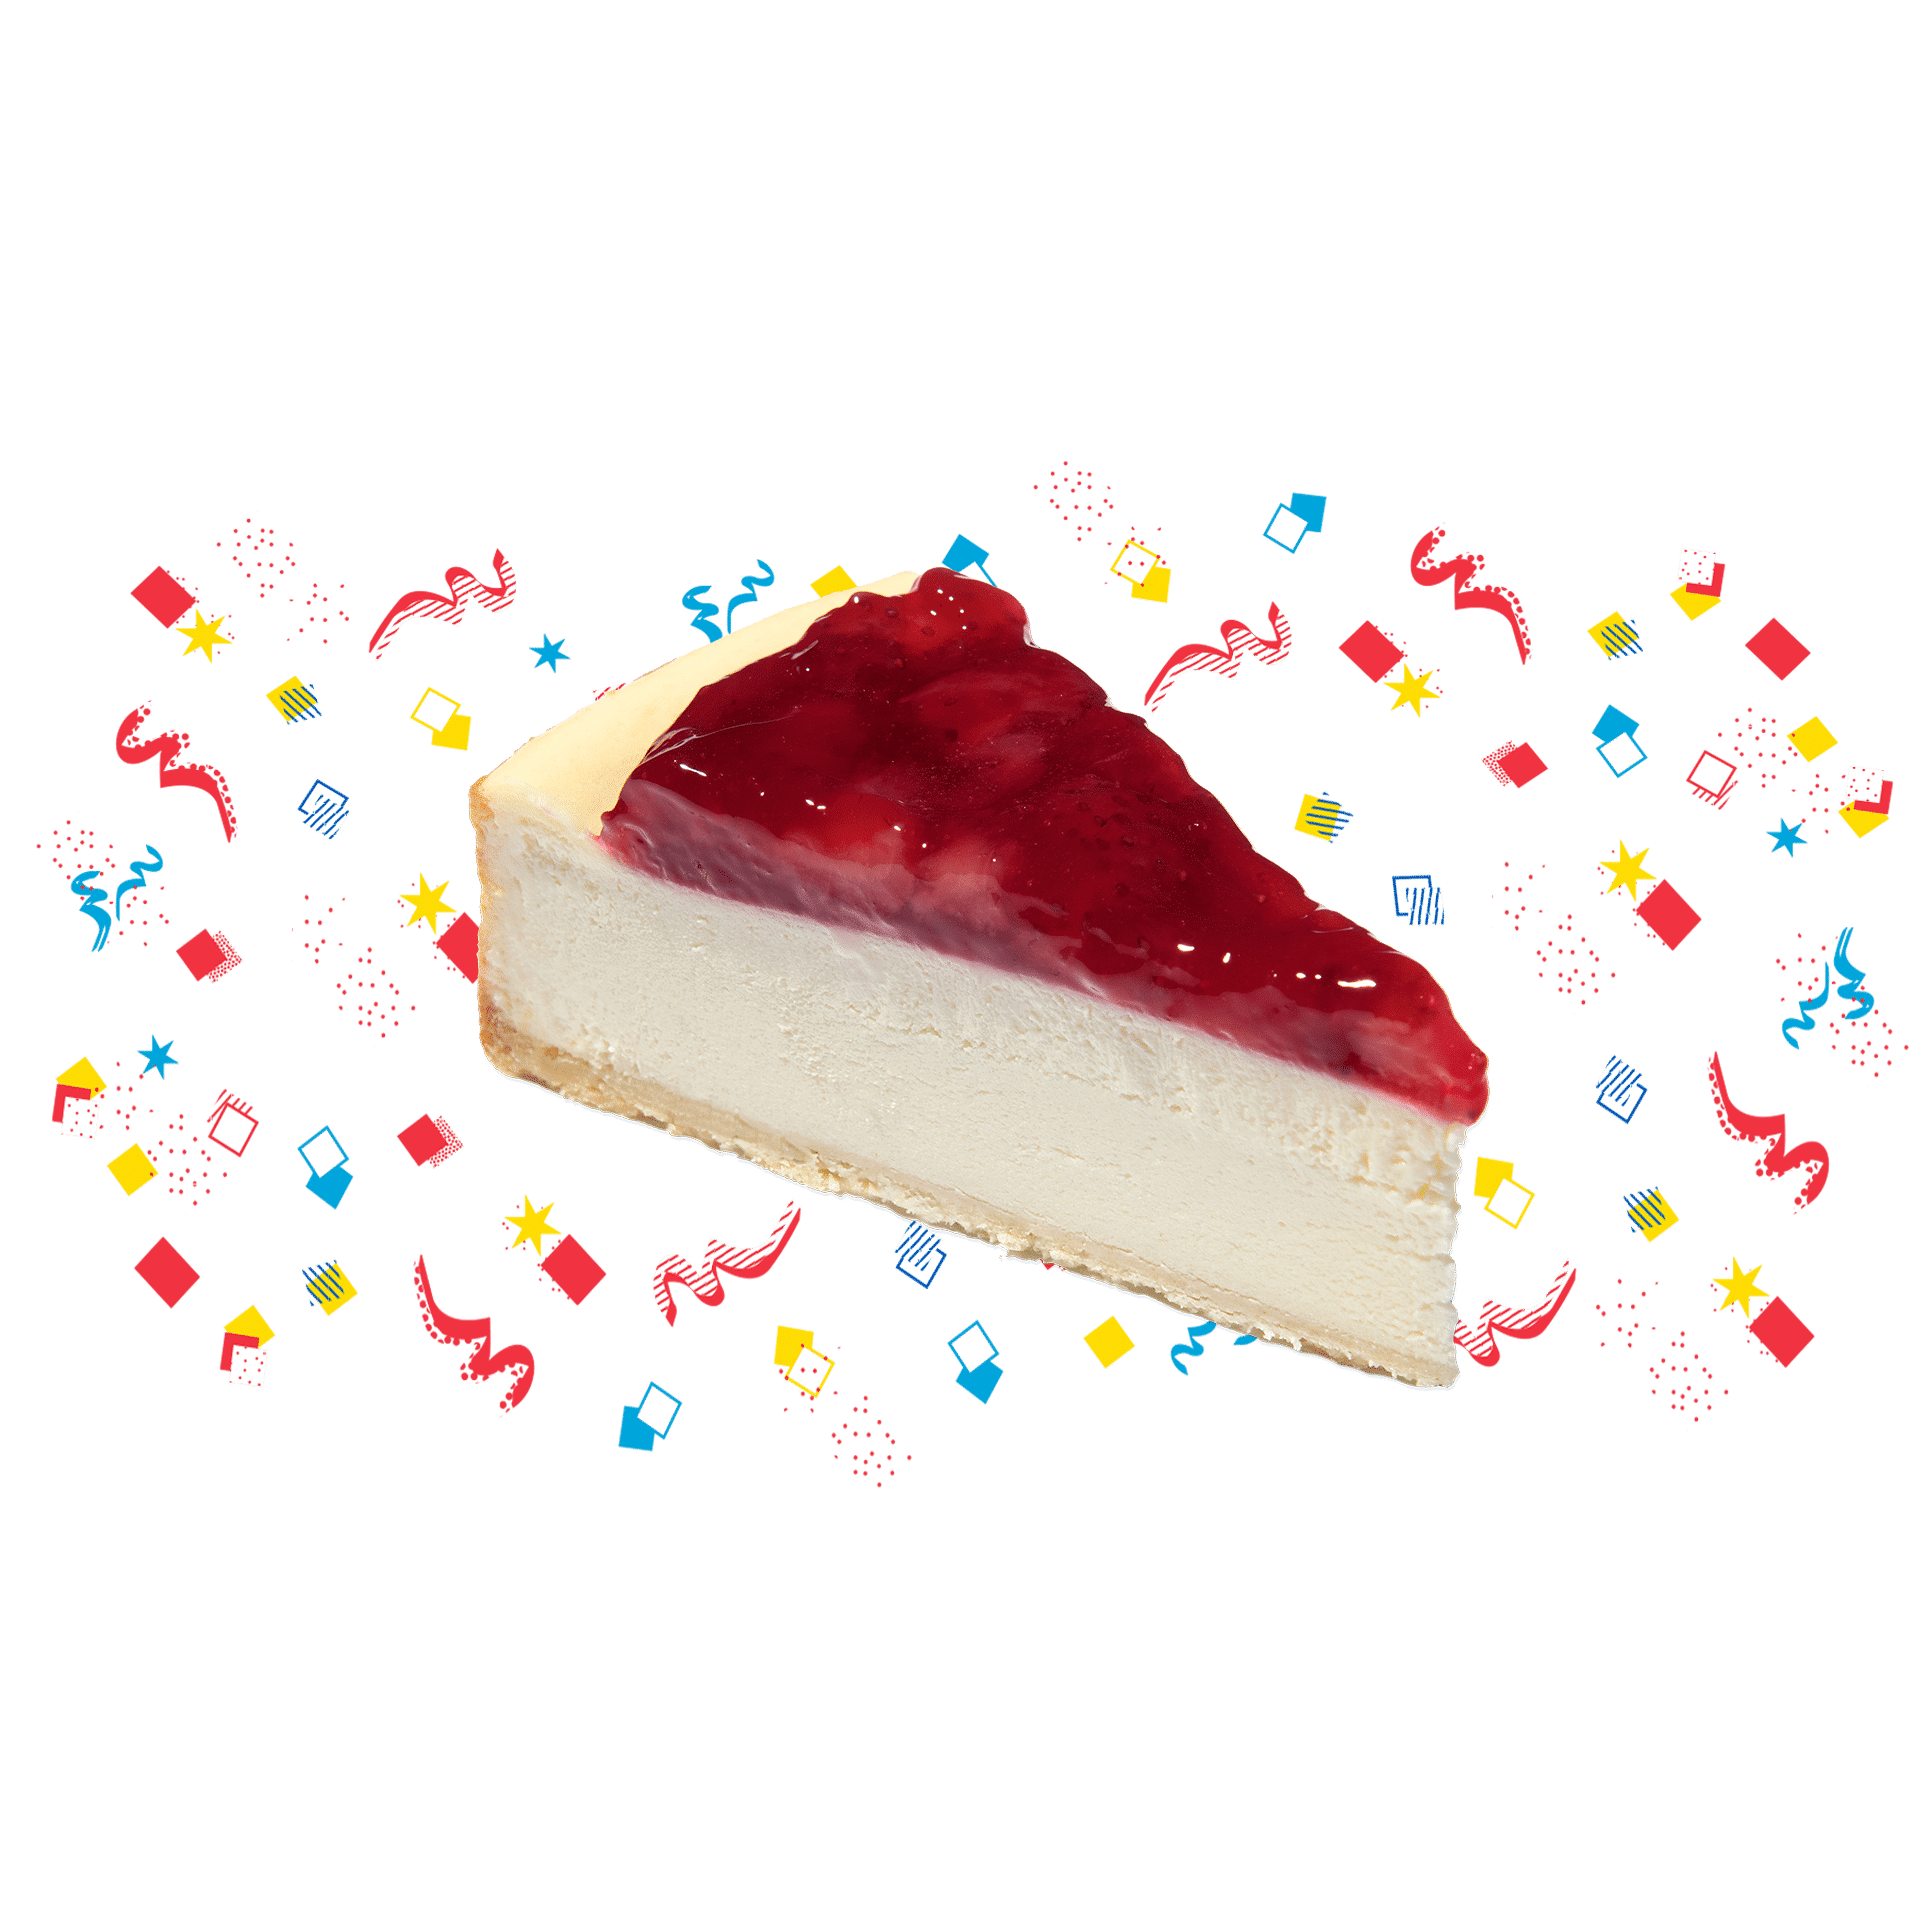 A slice of strawberry cheesecake with confetti behind it